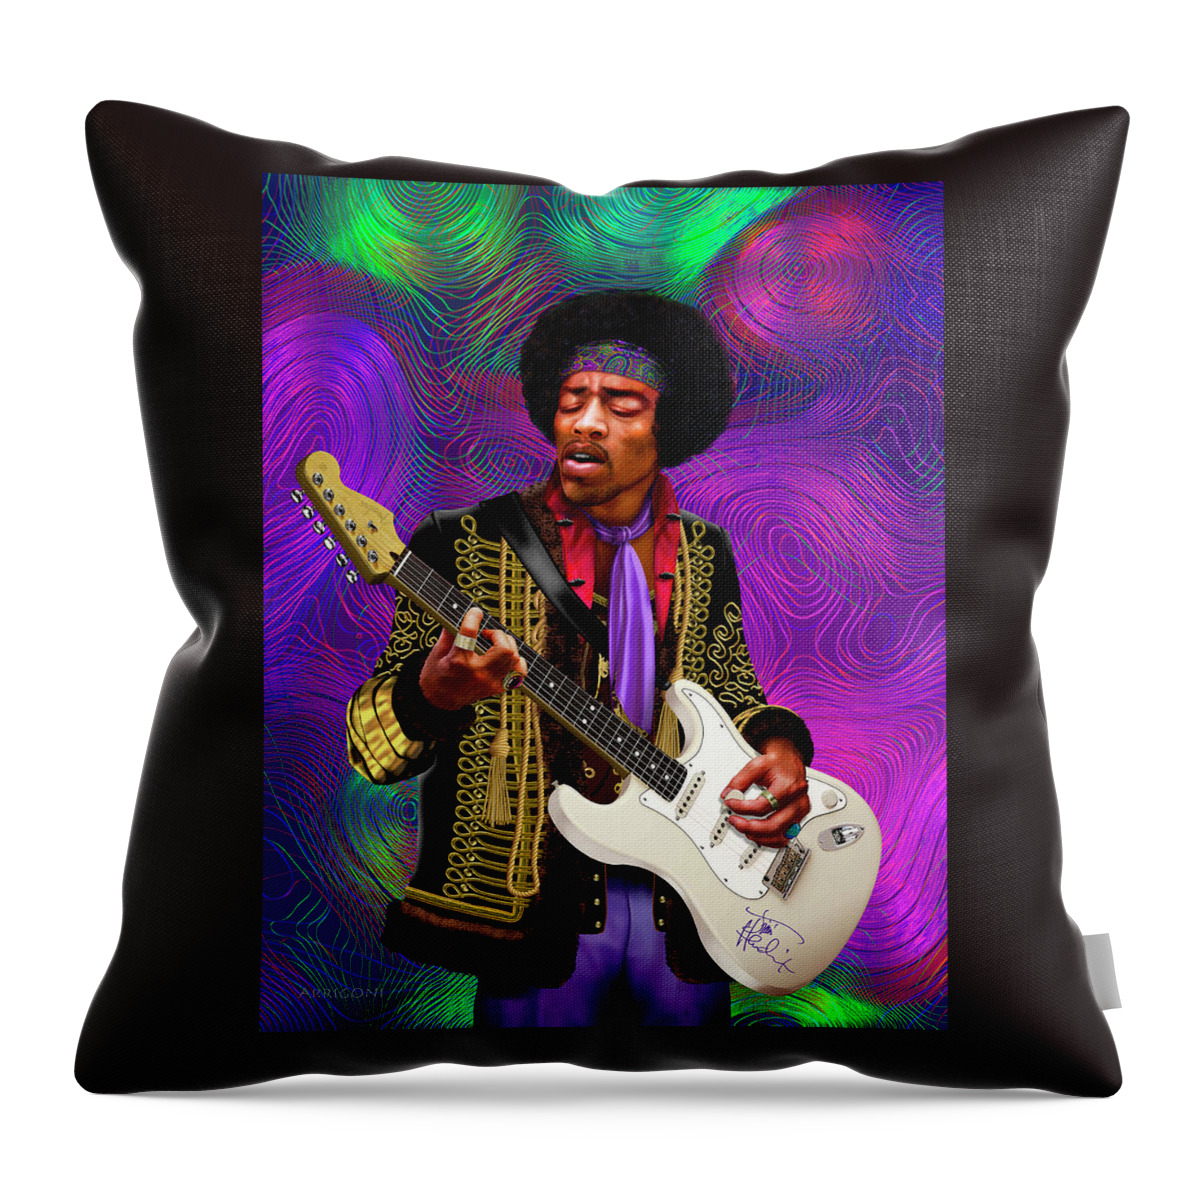 Portrait Throw Pillow featuring the painting Jimi Hendrix #1 by David Arrigoni